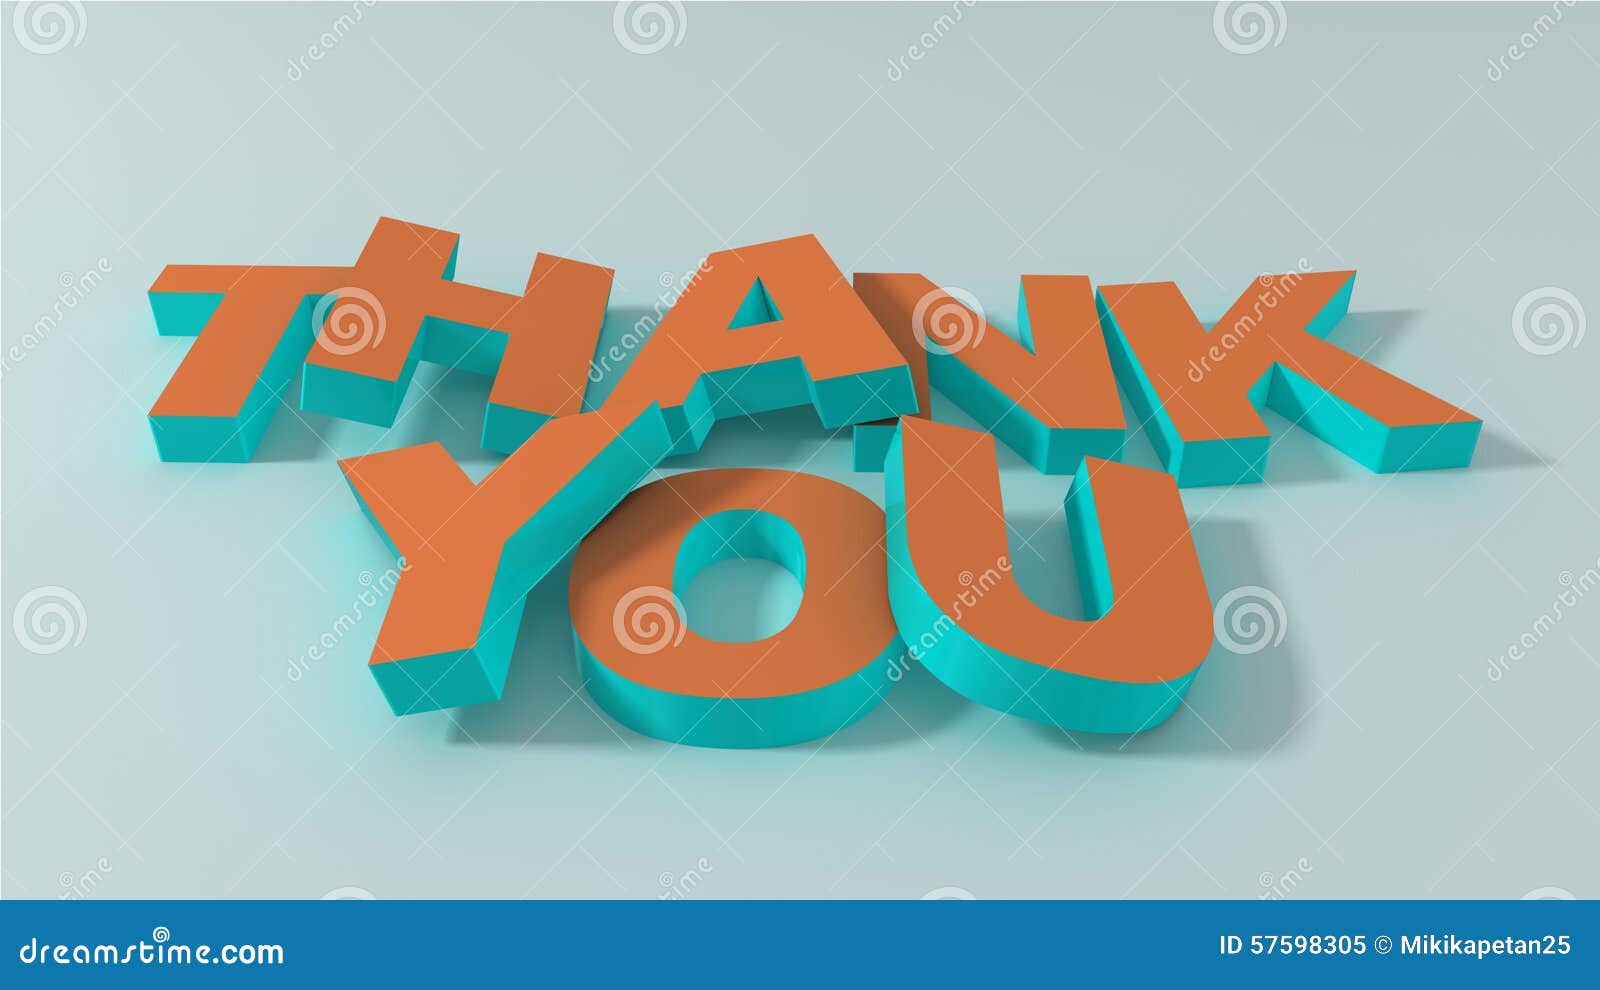 Thank You sign 3d Render